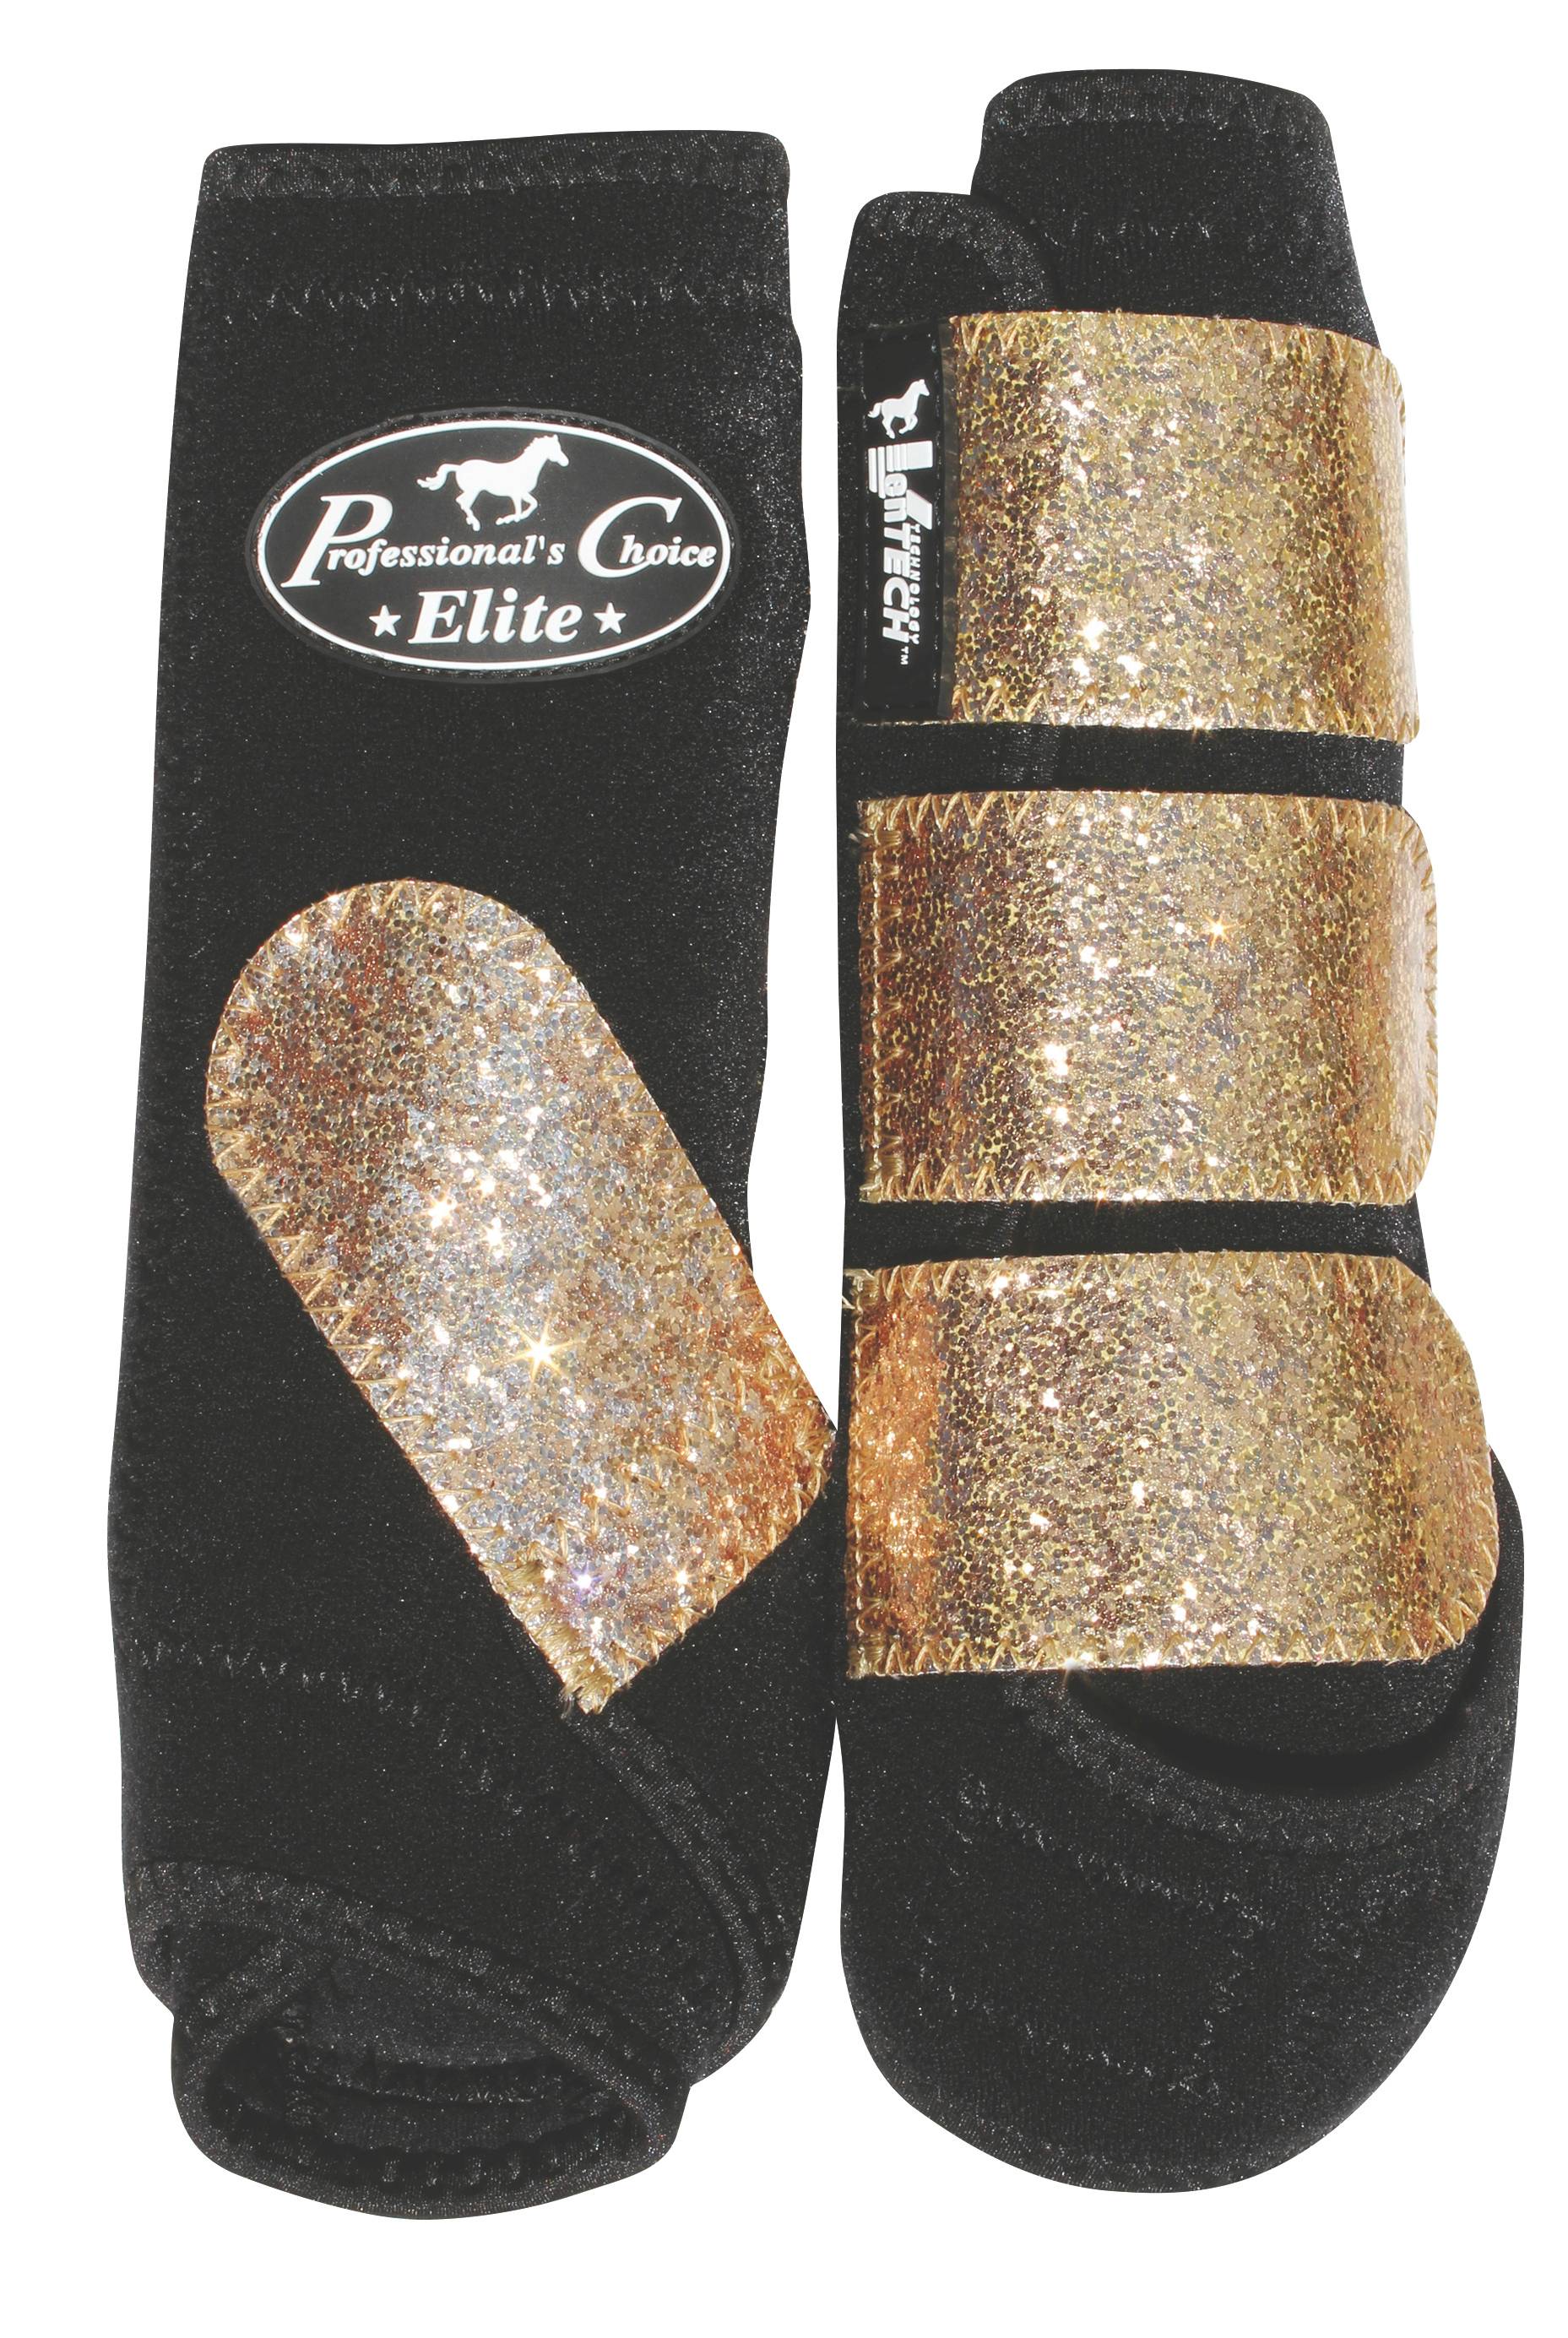 professional choice glitter bell boots